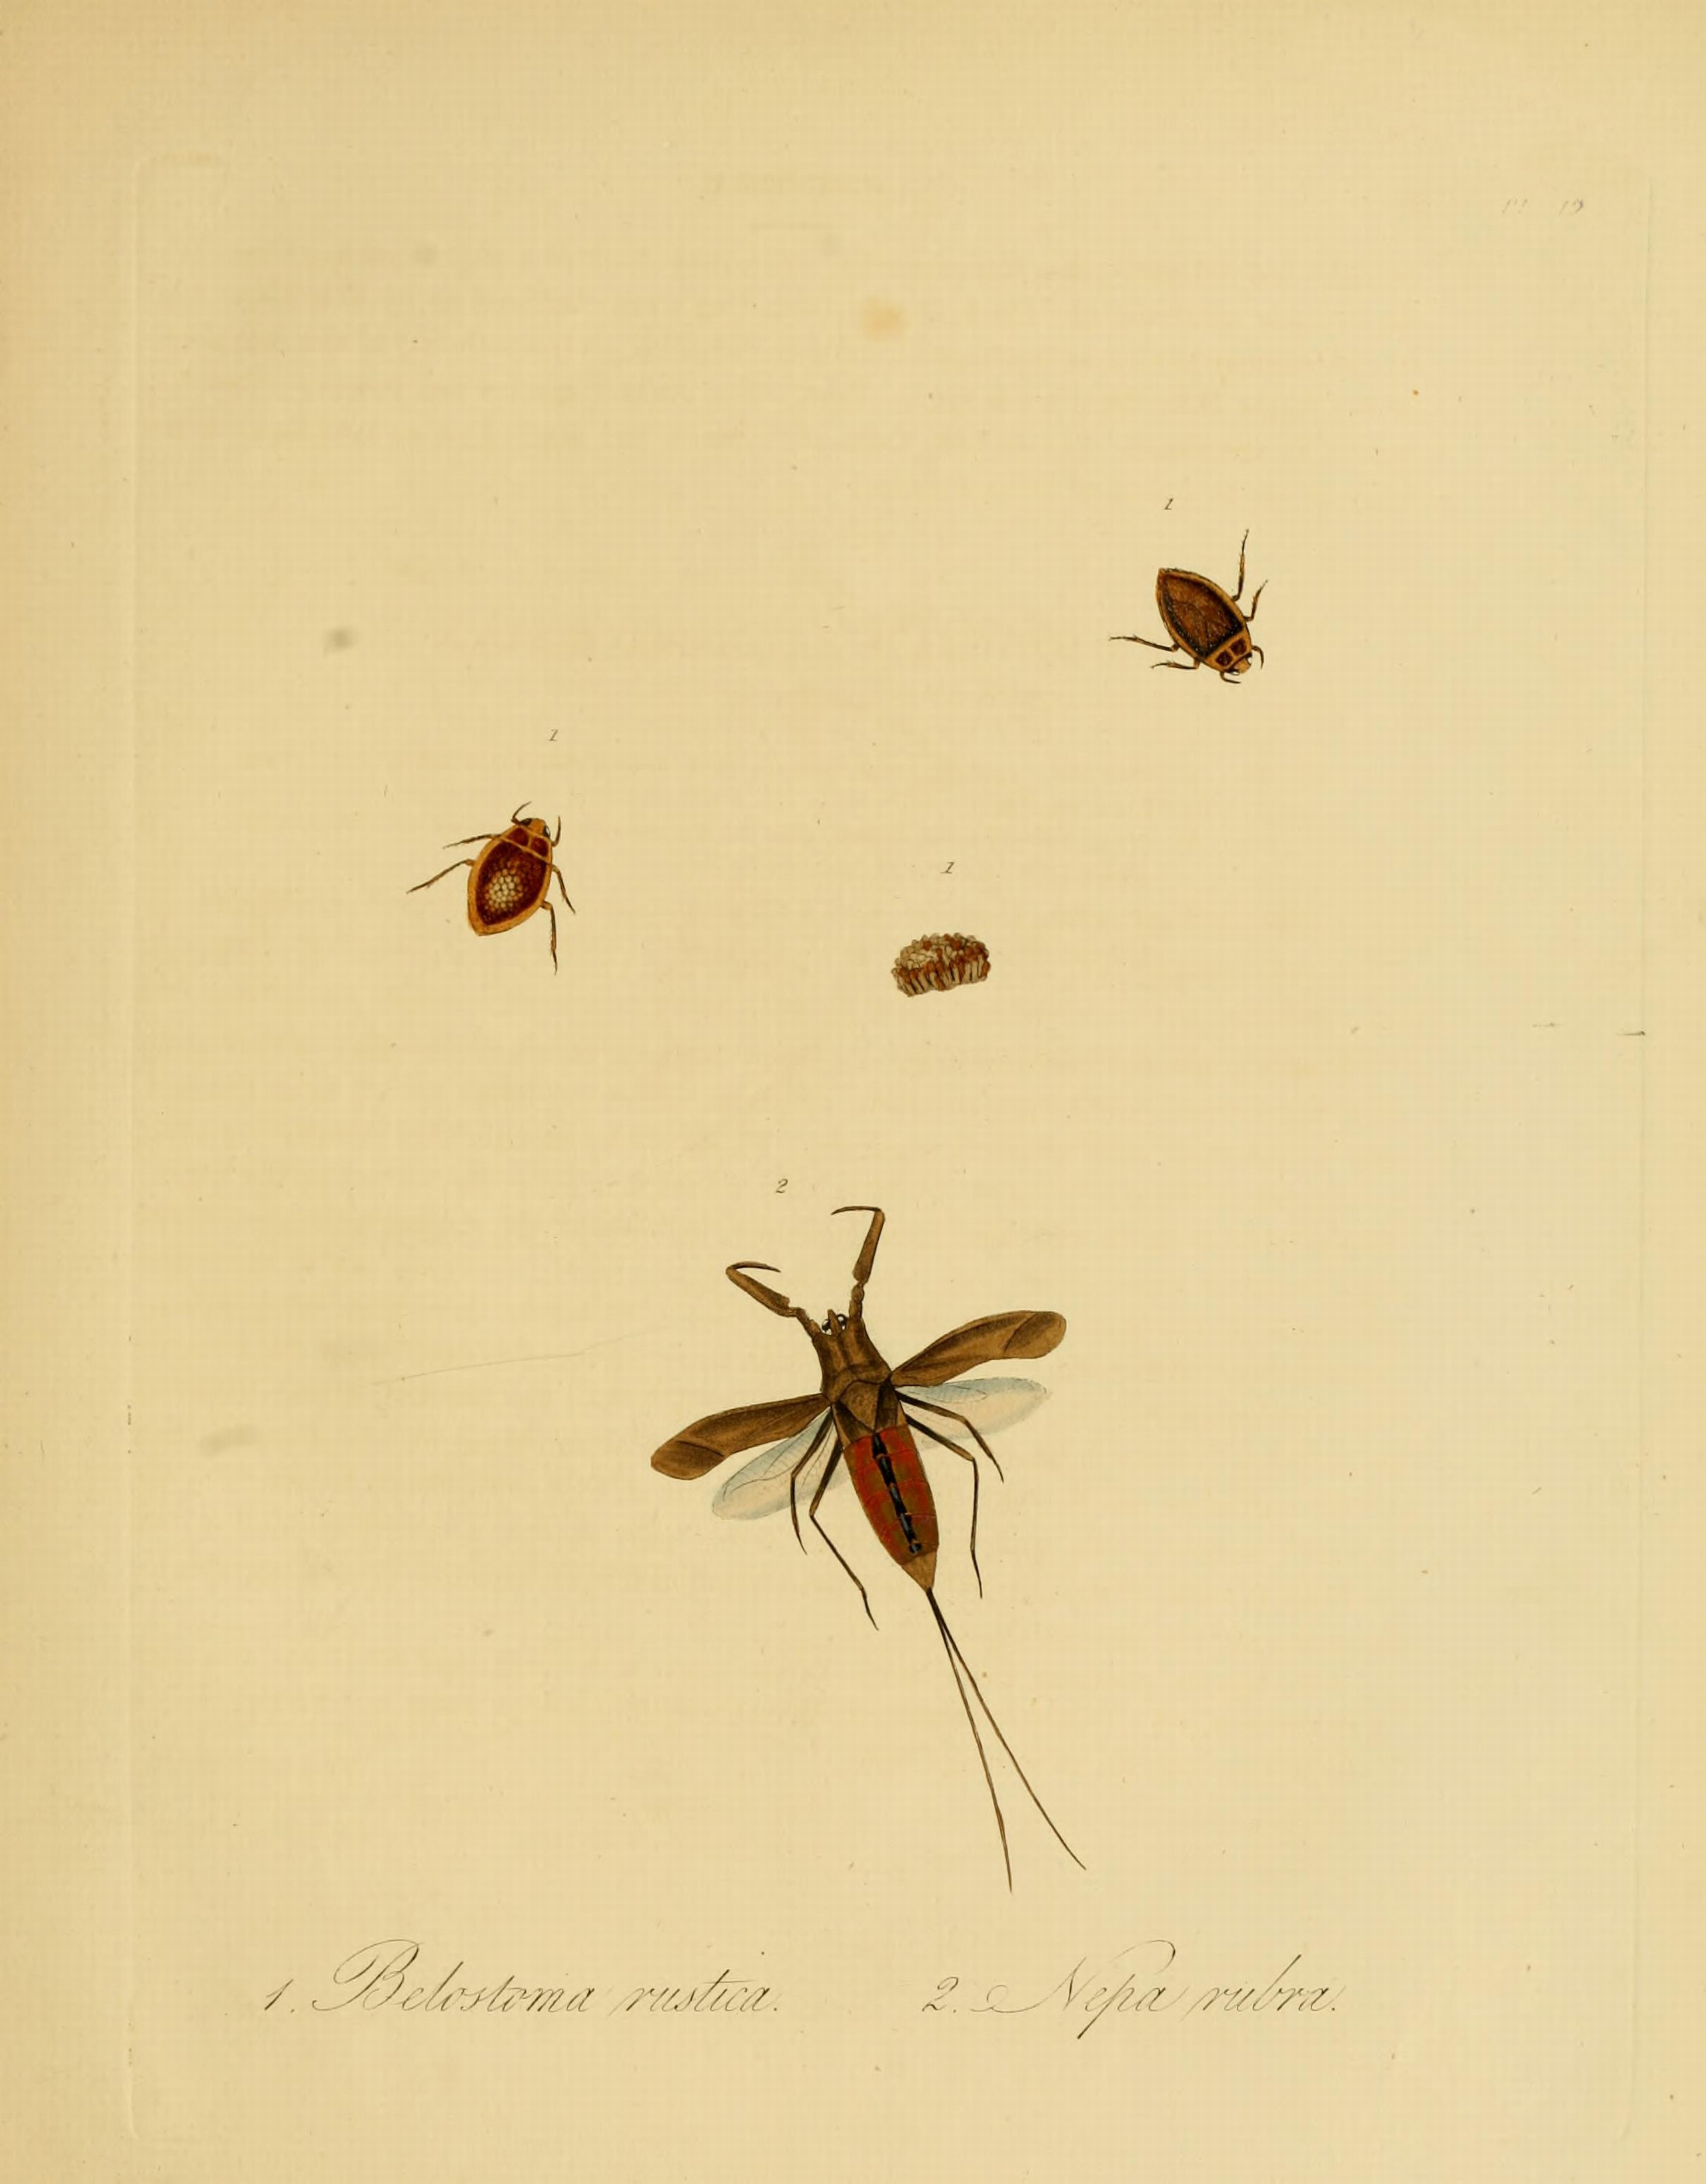 Donovan - Insects of China, 1838 - pl 19